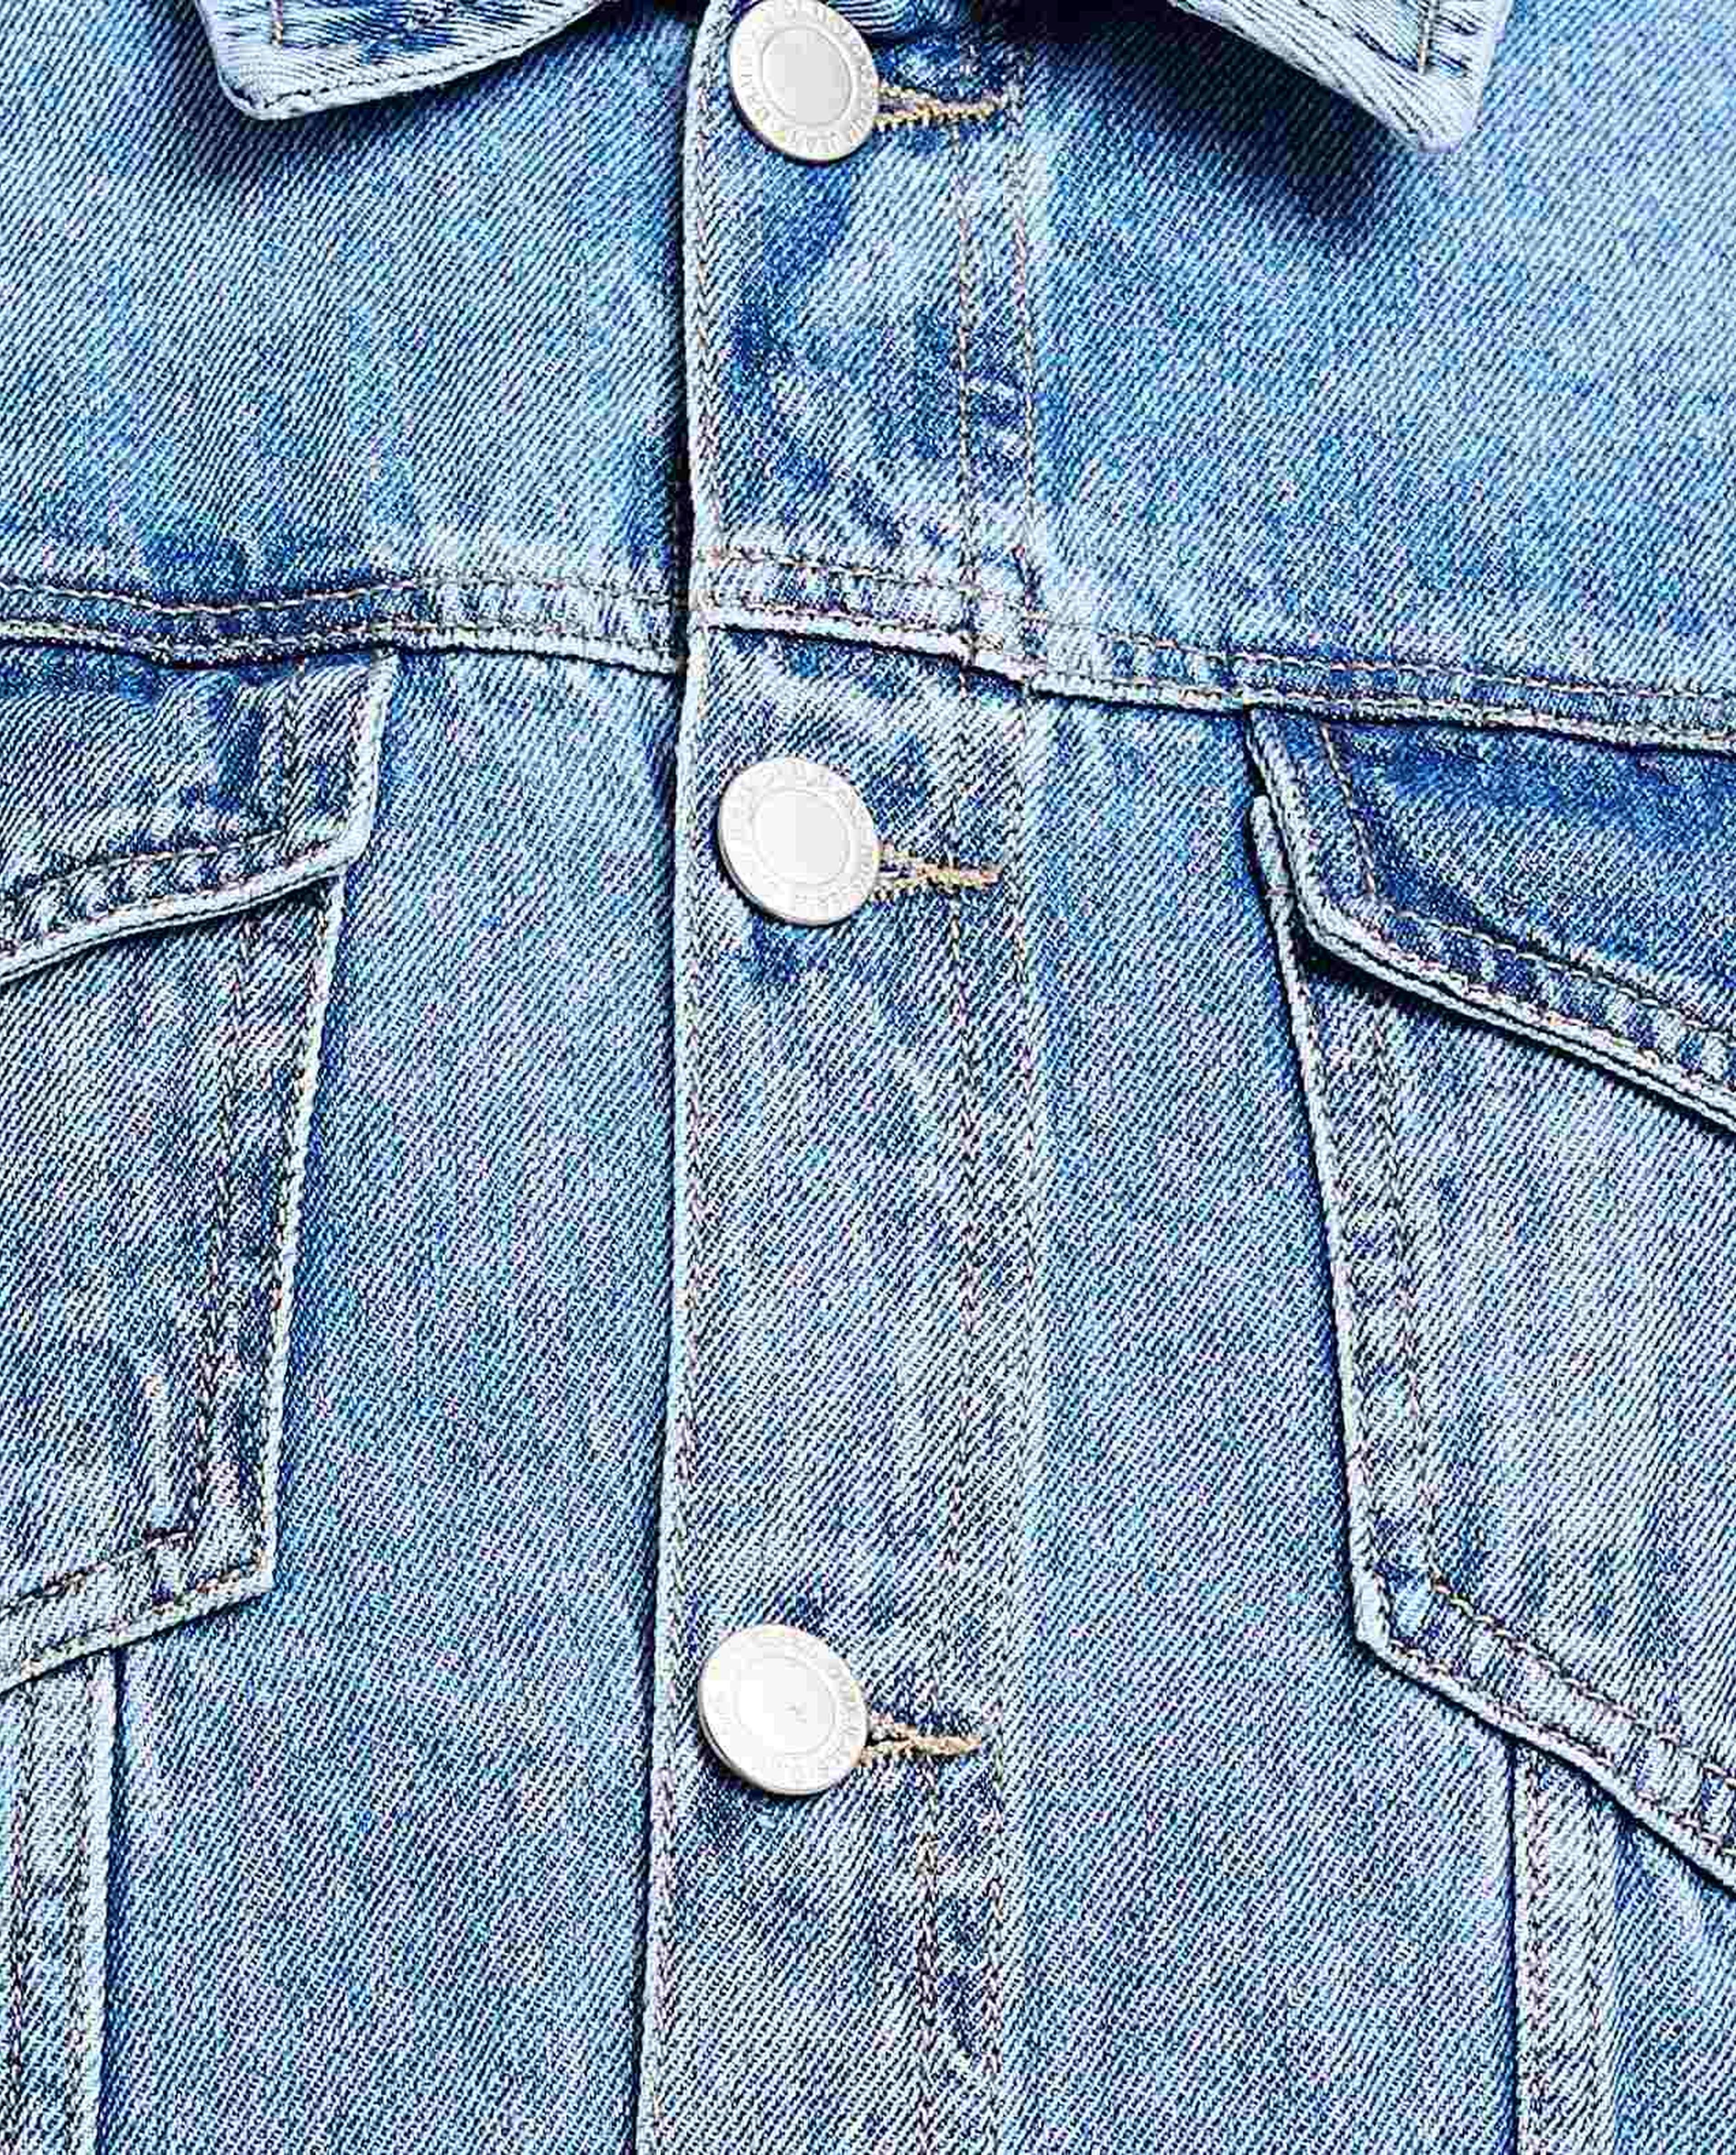 Faded Denim Jacket with Button Closure